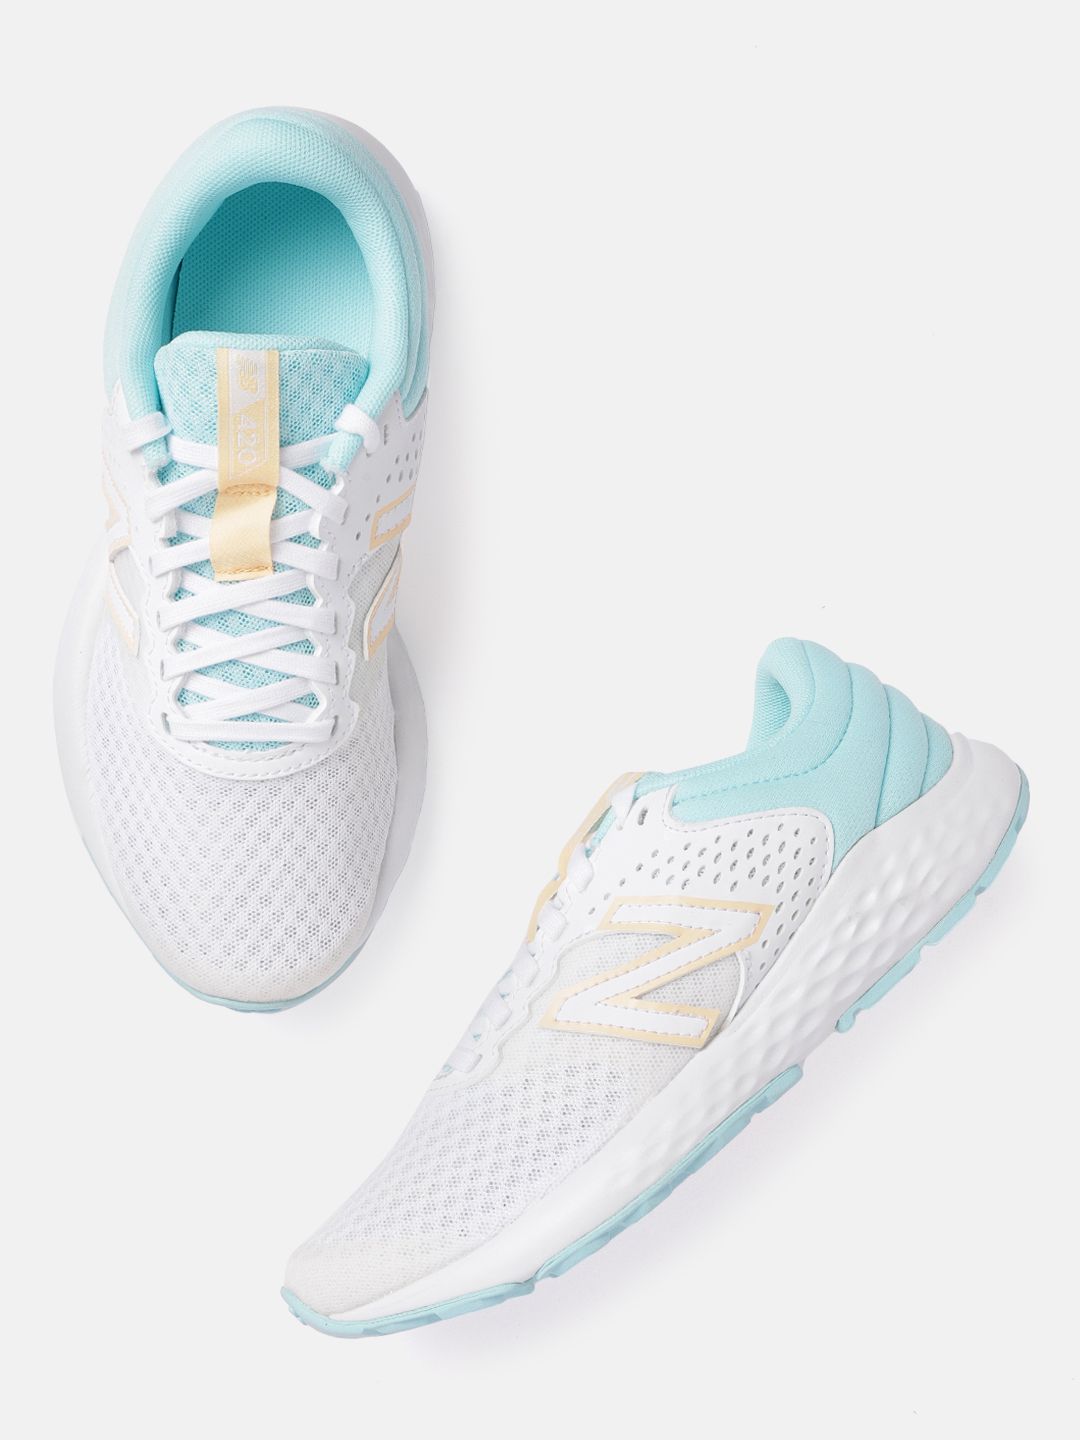 New Balance Women White & Blue Woven Design Running Shoes Price in India